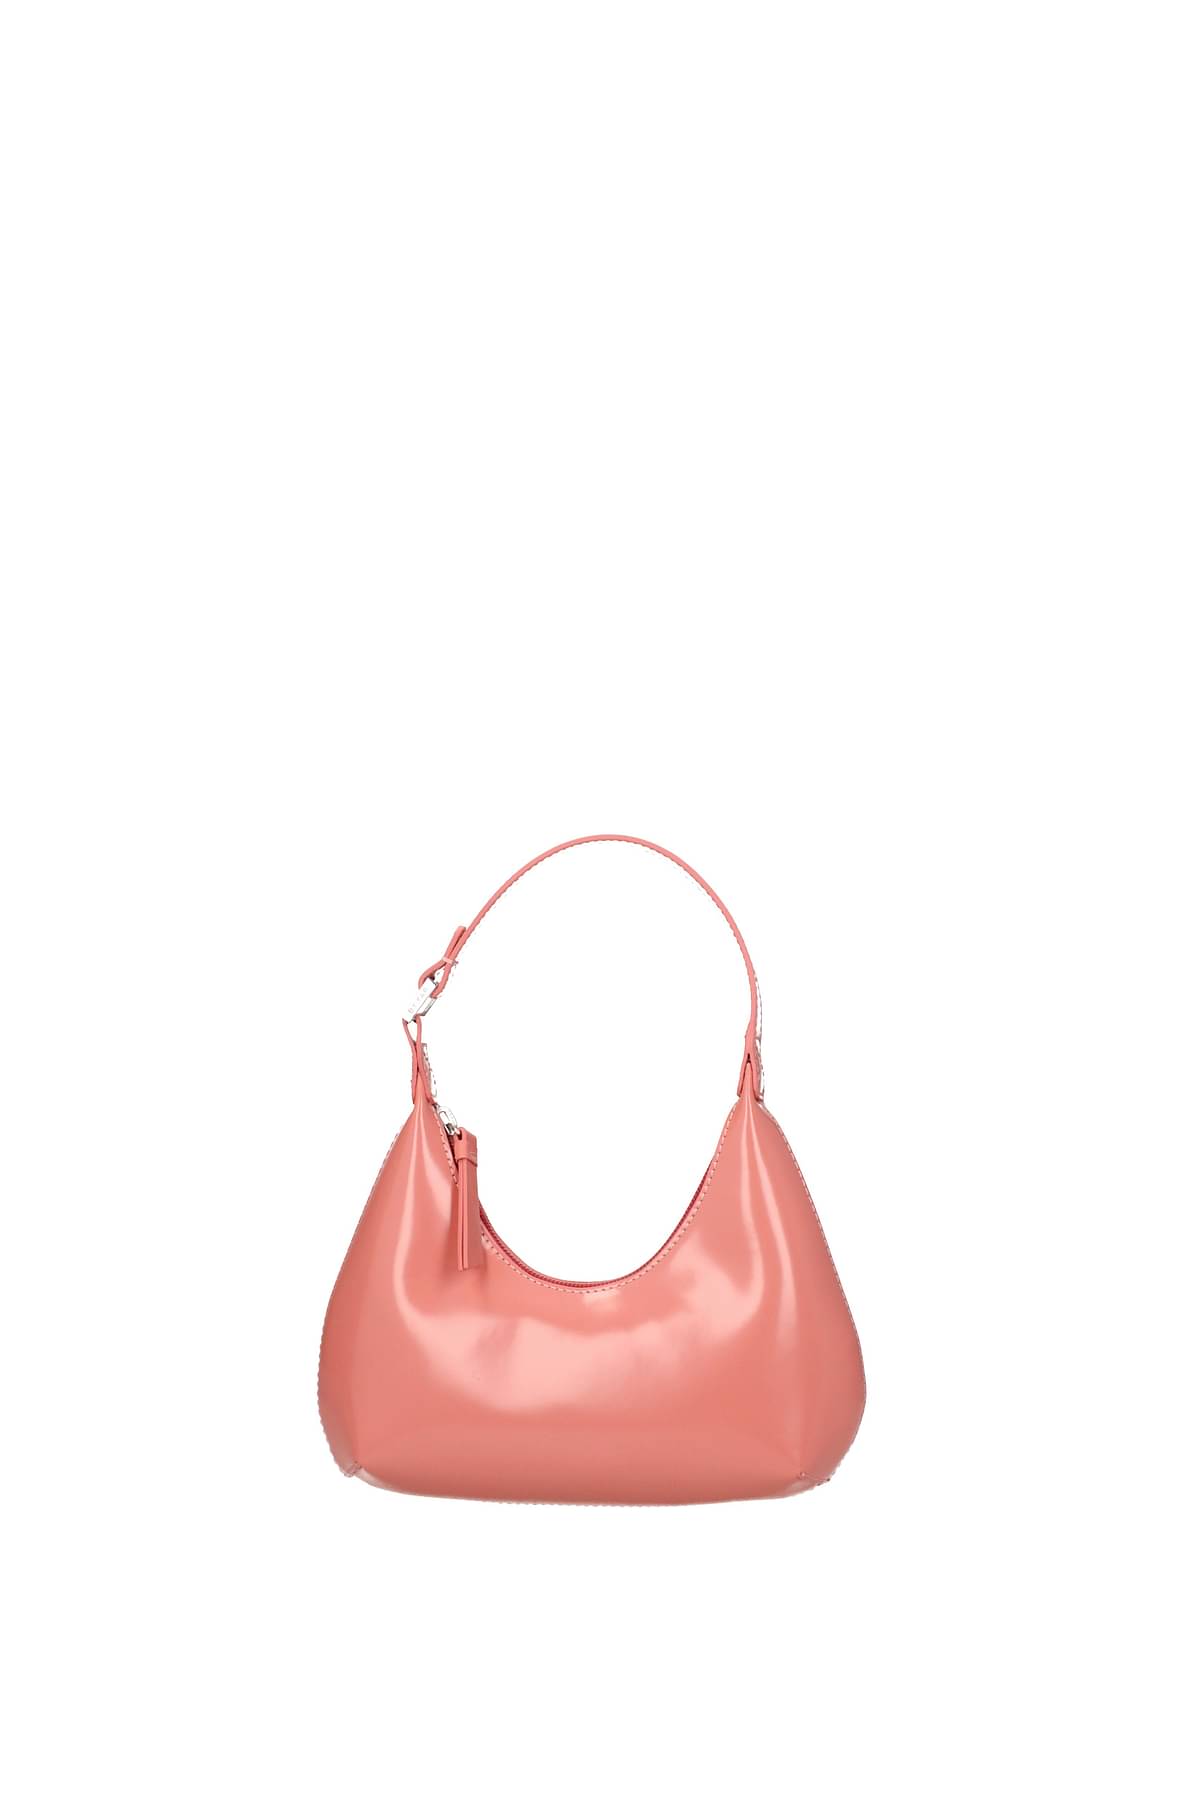 BY FAR Amber Bag in Red